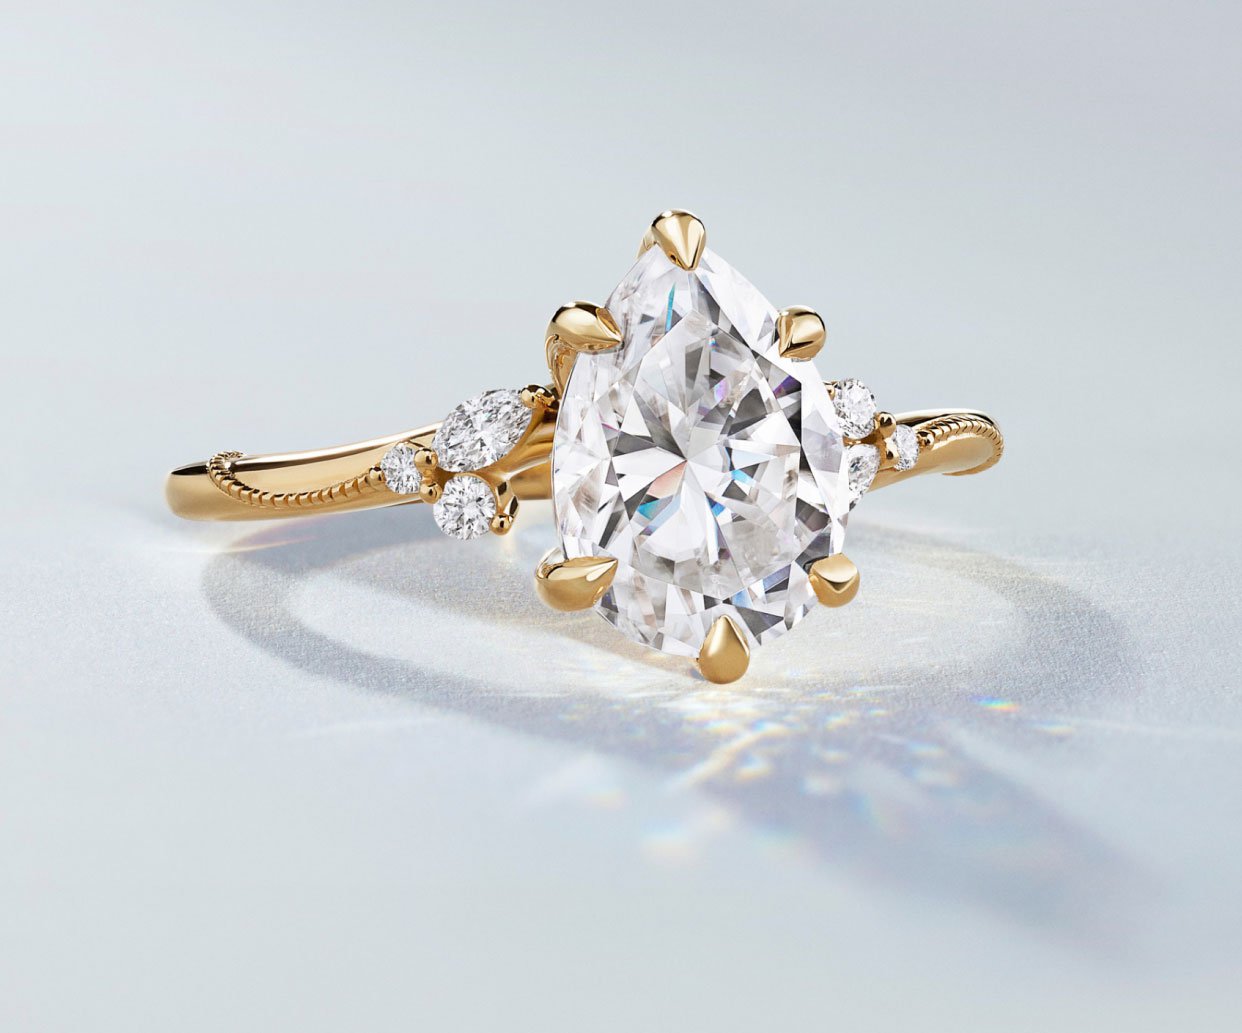 Pear diamond engagement ring from Brilliant Earth's Camellia collection.